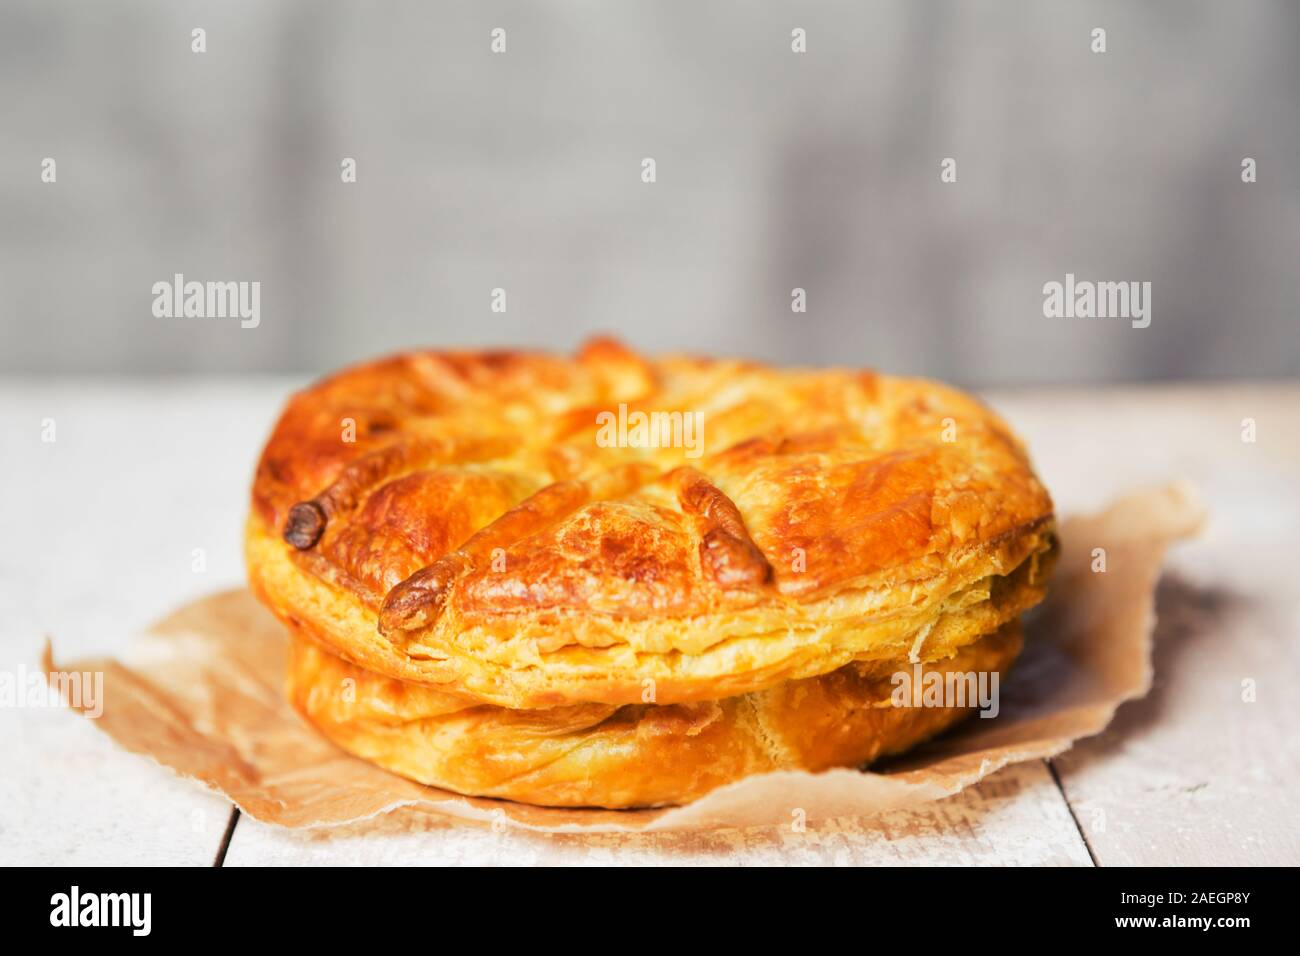 A homemade meat pie on a rustic table. Stock Photo